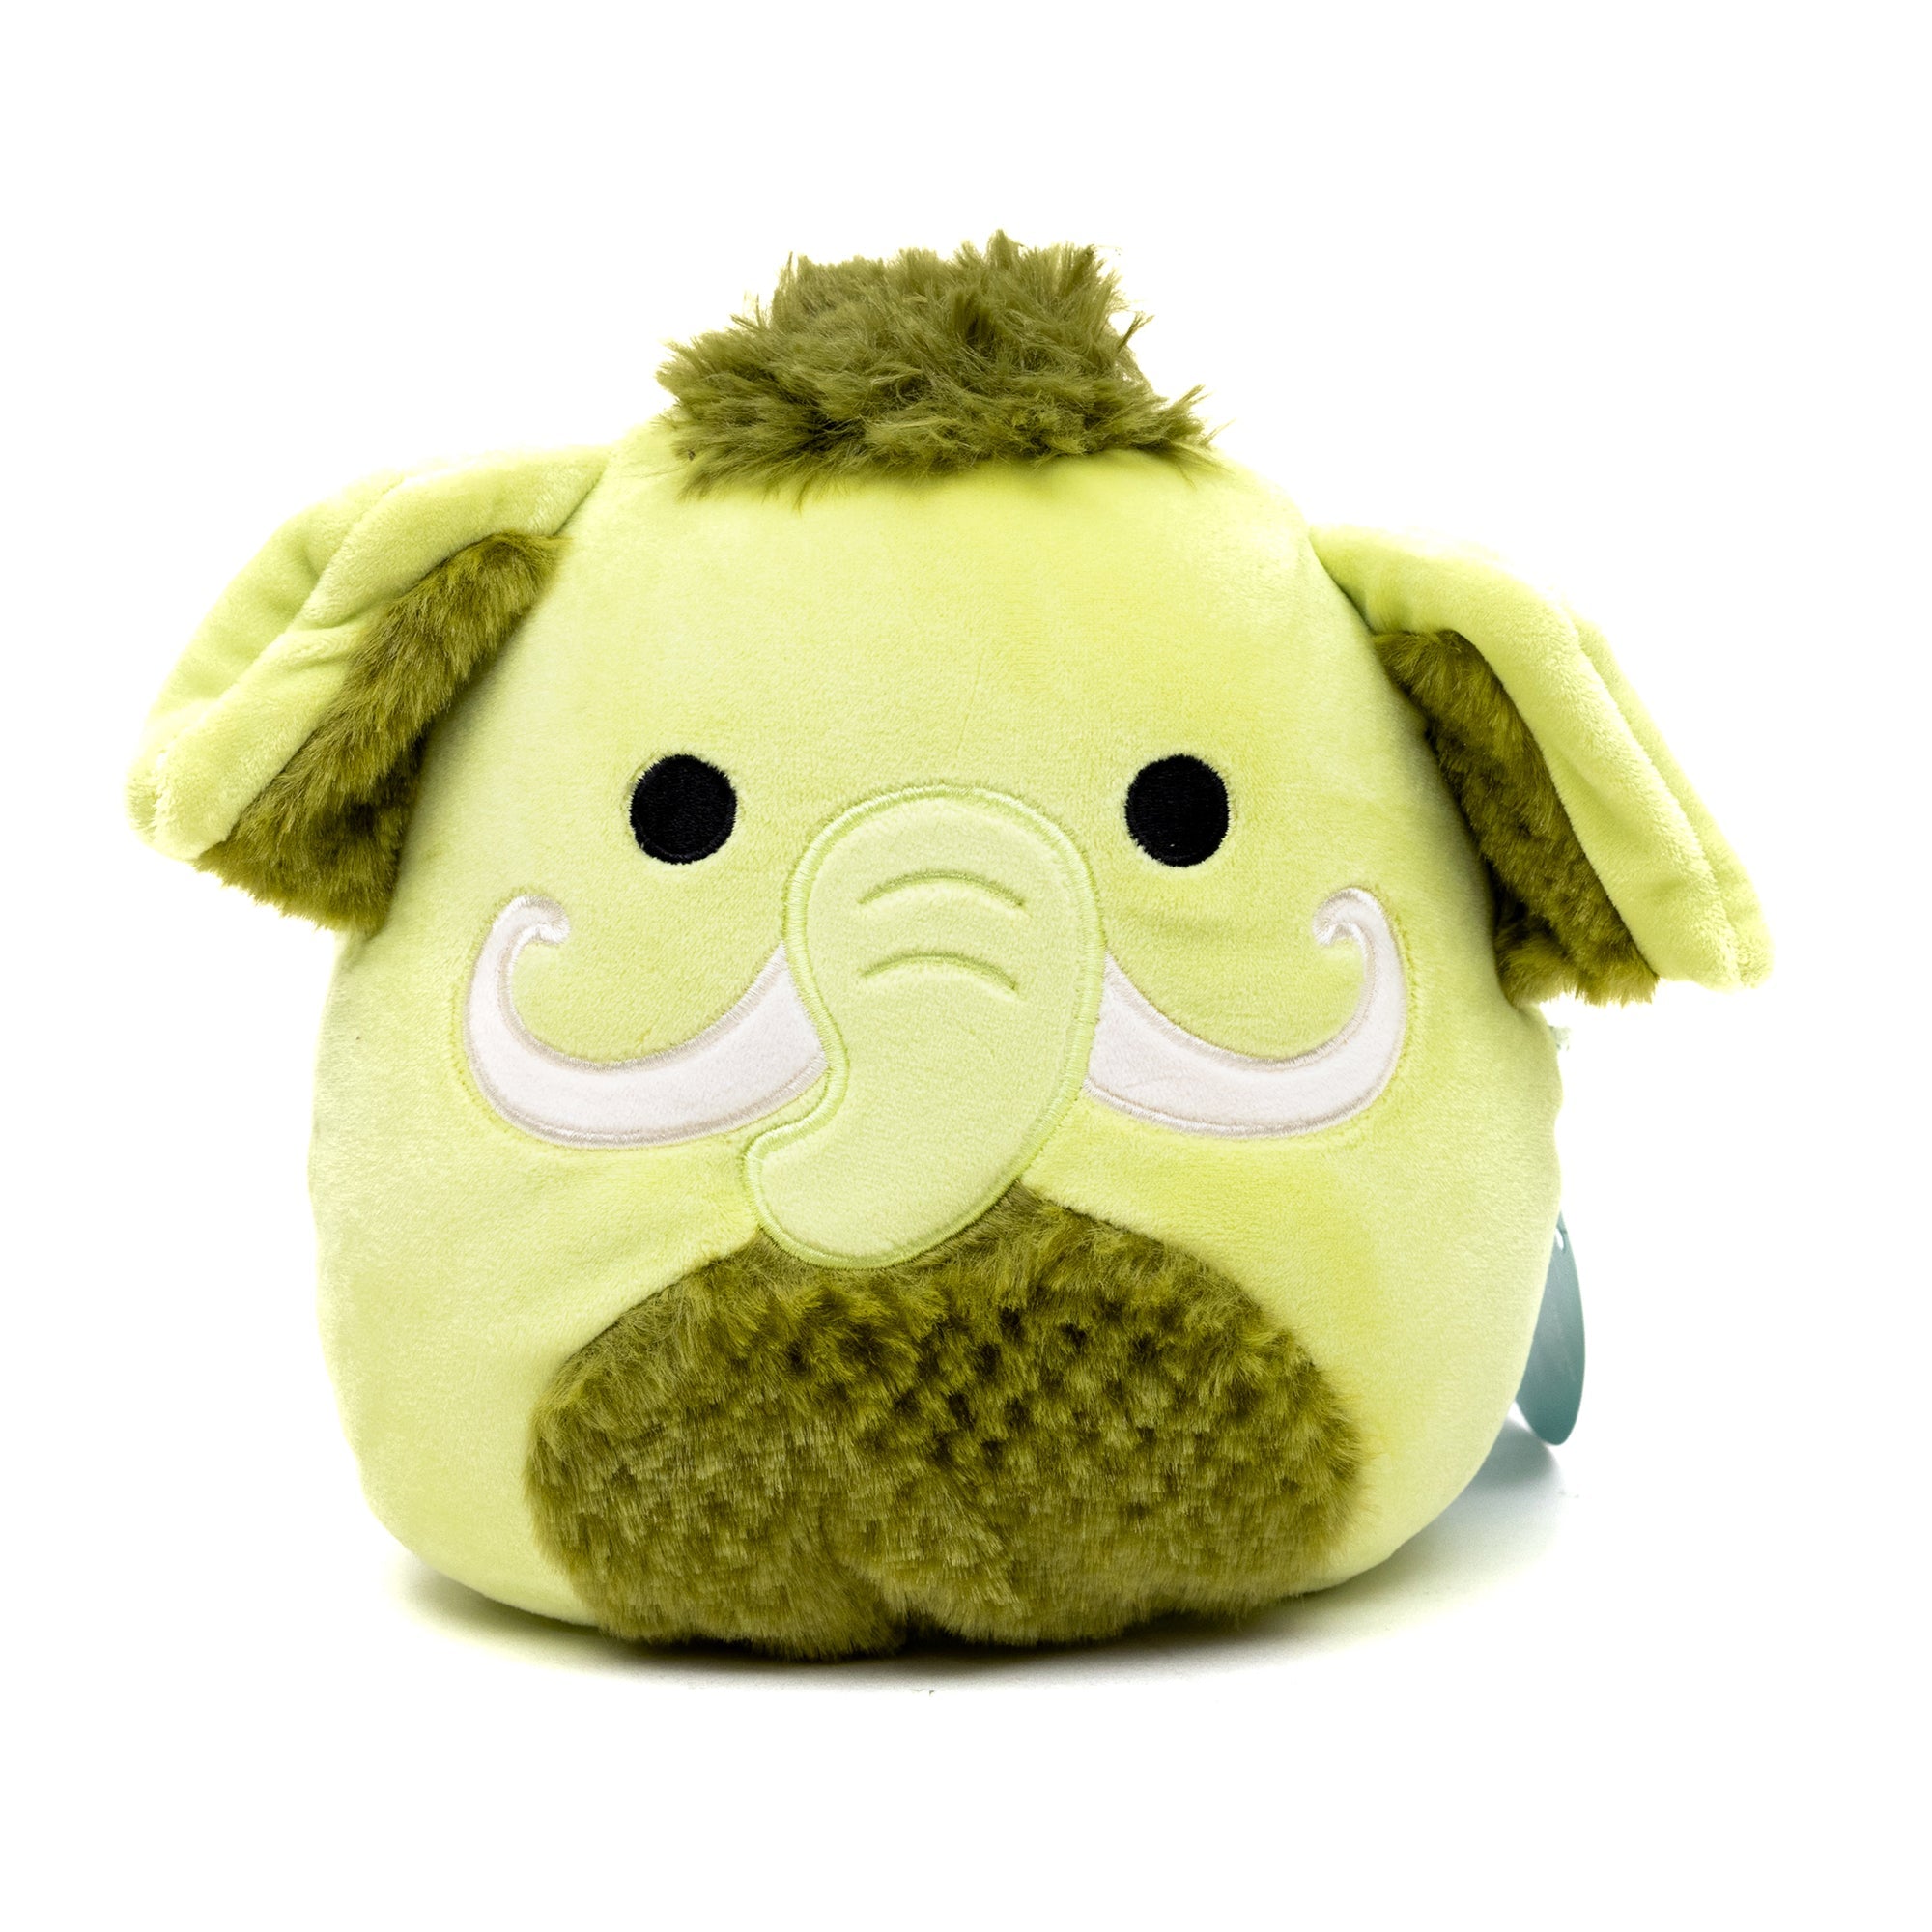 Farhad the Wooly Mammoth 5” Squishmallow - Cozy Assortment